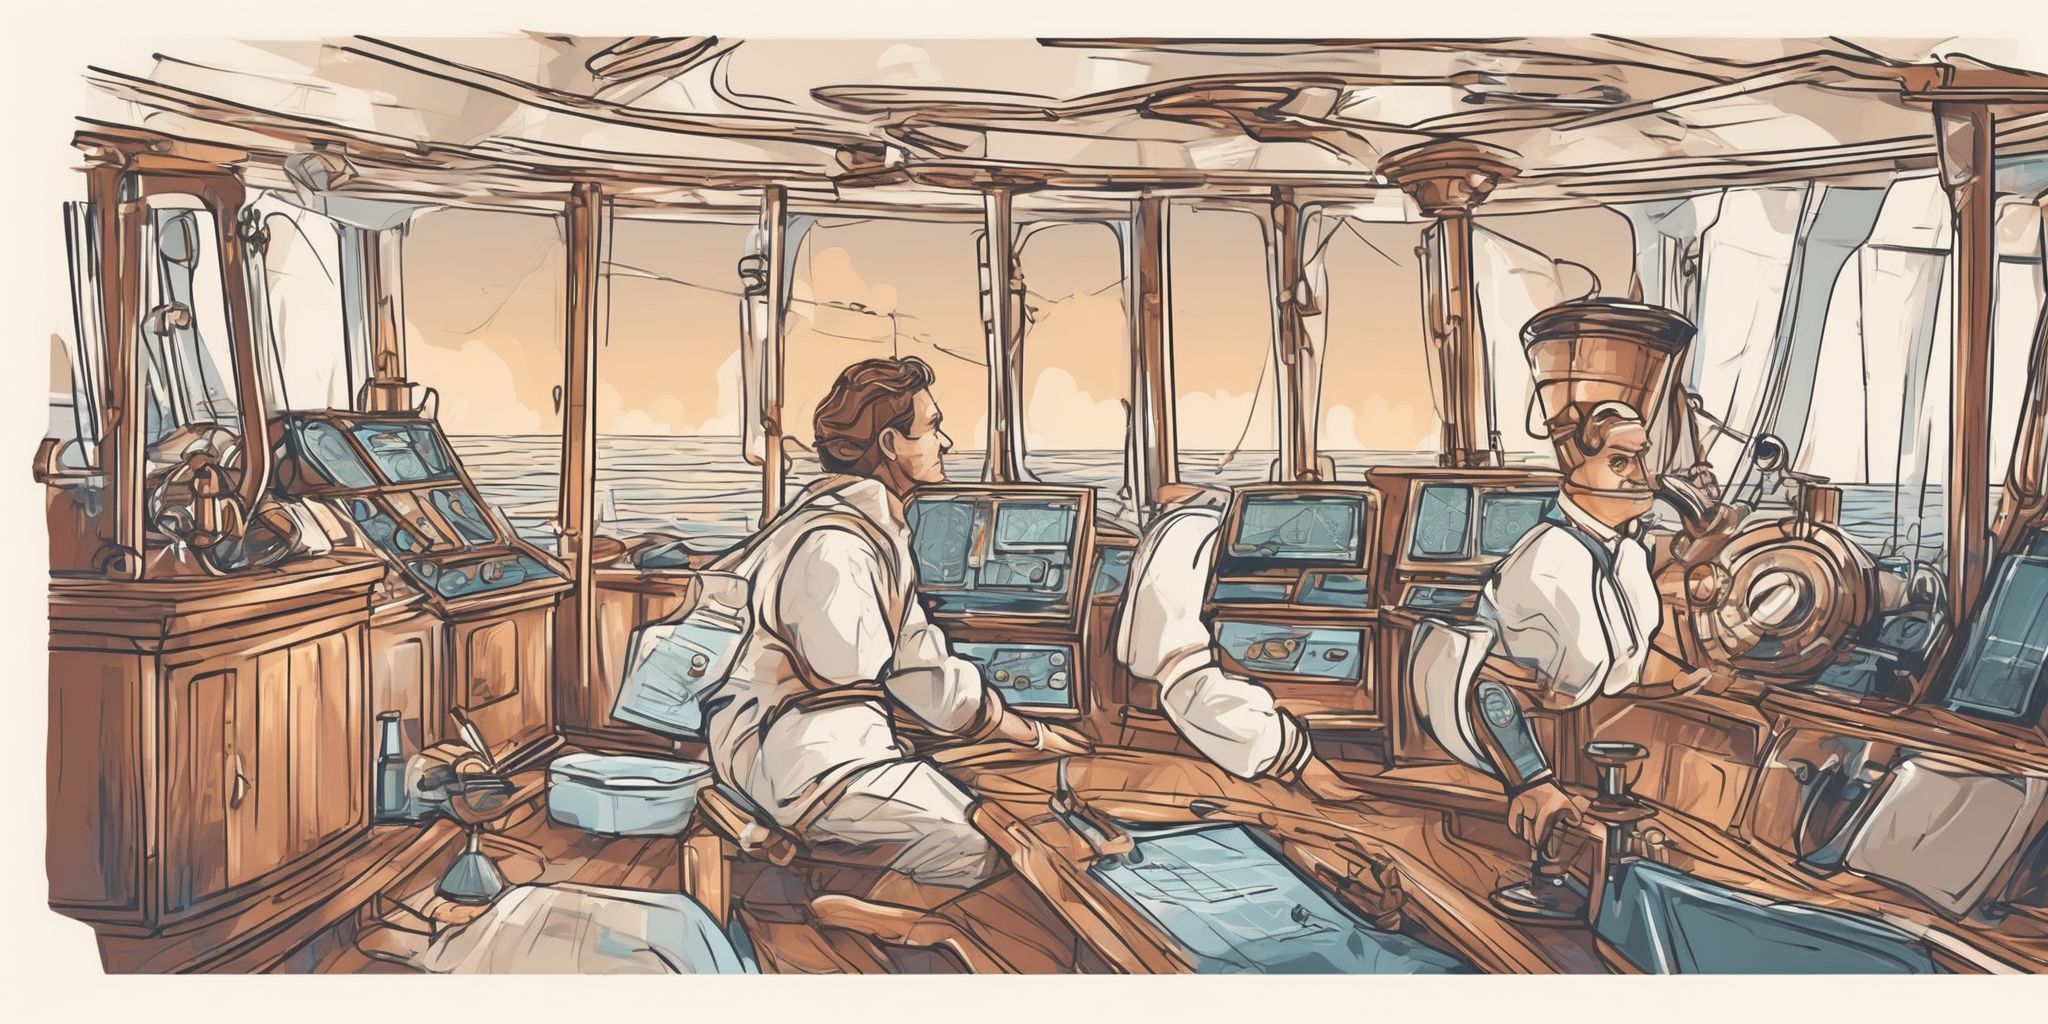 Navigator on a ship in illustration style with gradients and white background